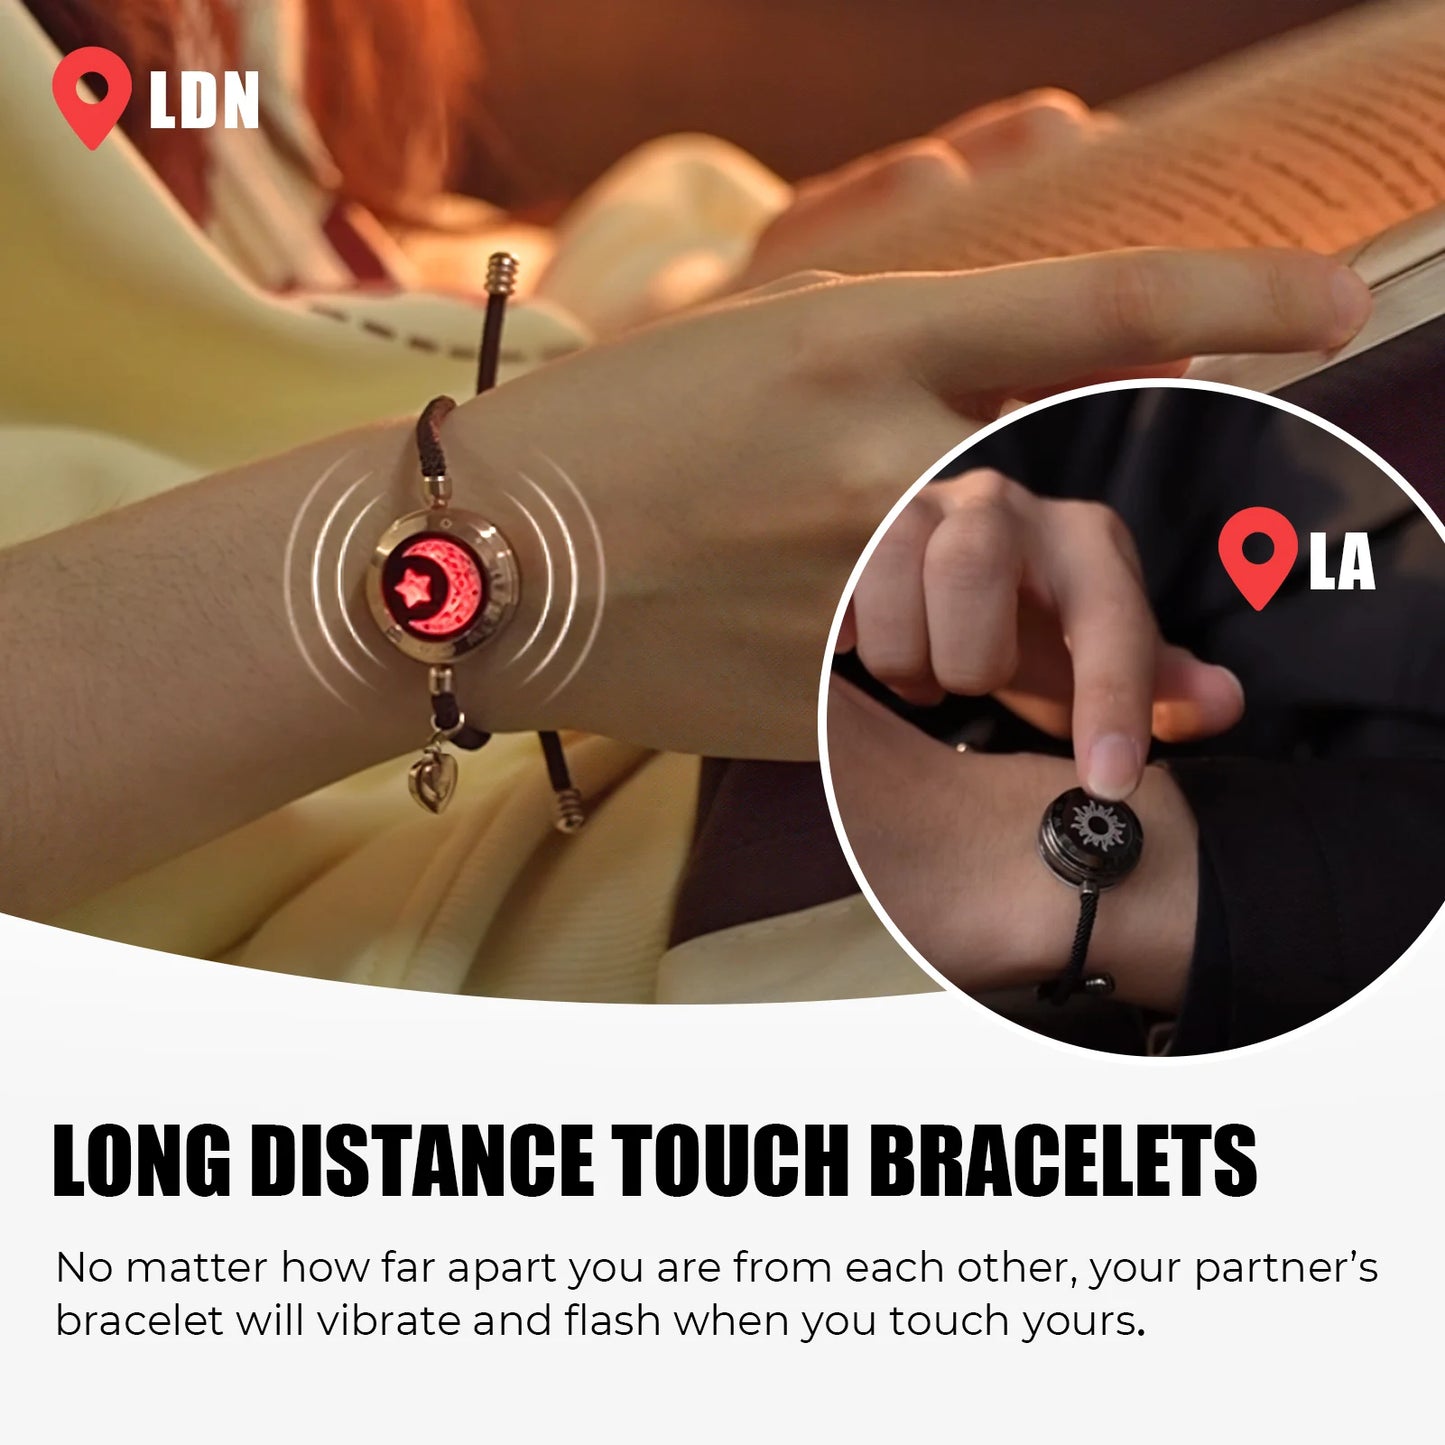 Radiant Bonds: Introducing Totwoo's Long-Distance Touch Bracelets for Couples - A Celestial Connection for Lovebirds